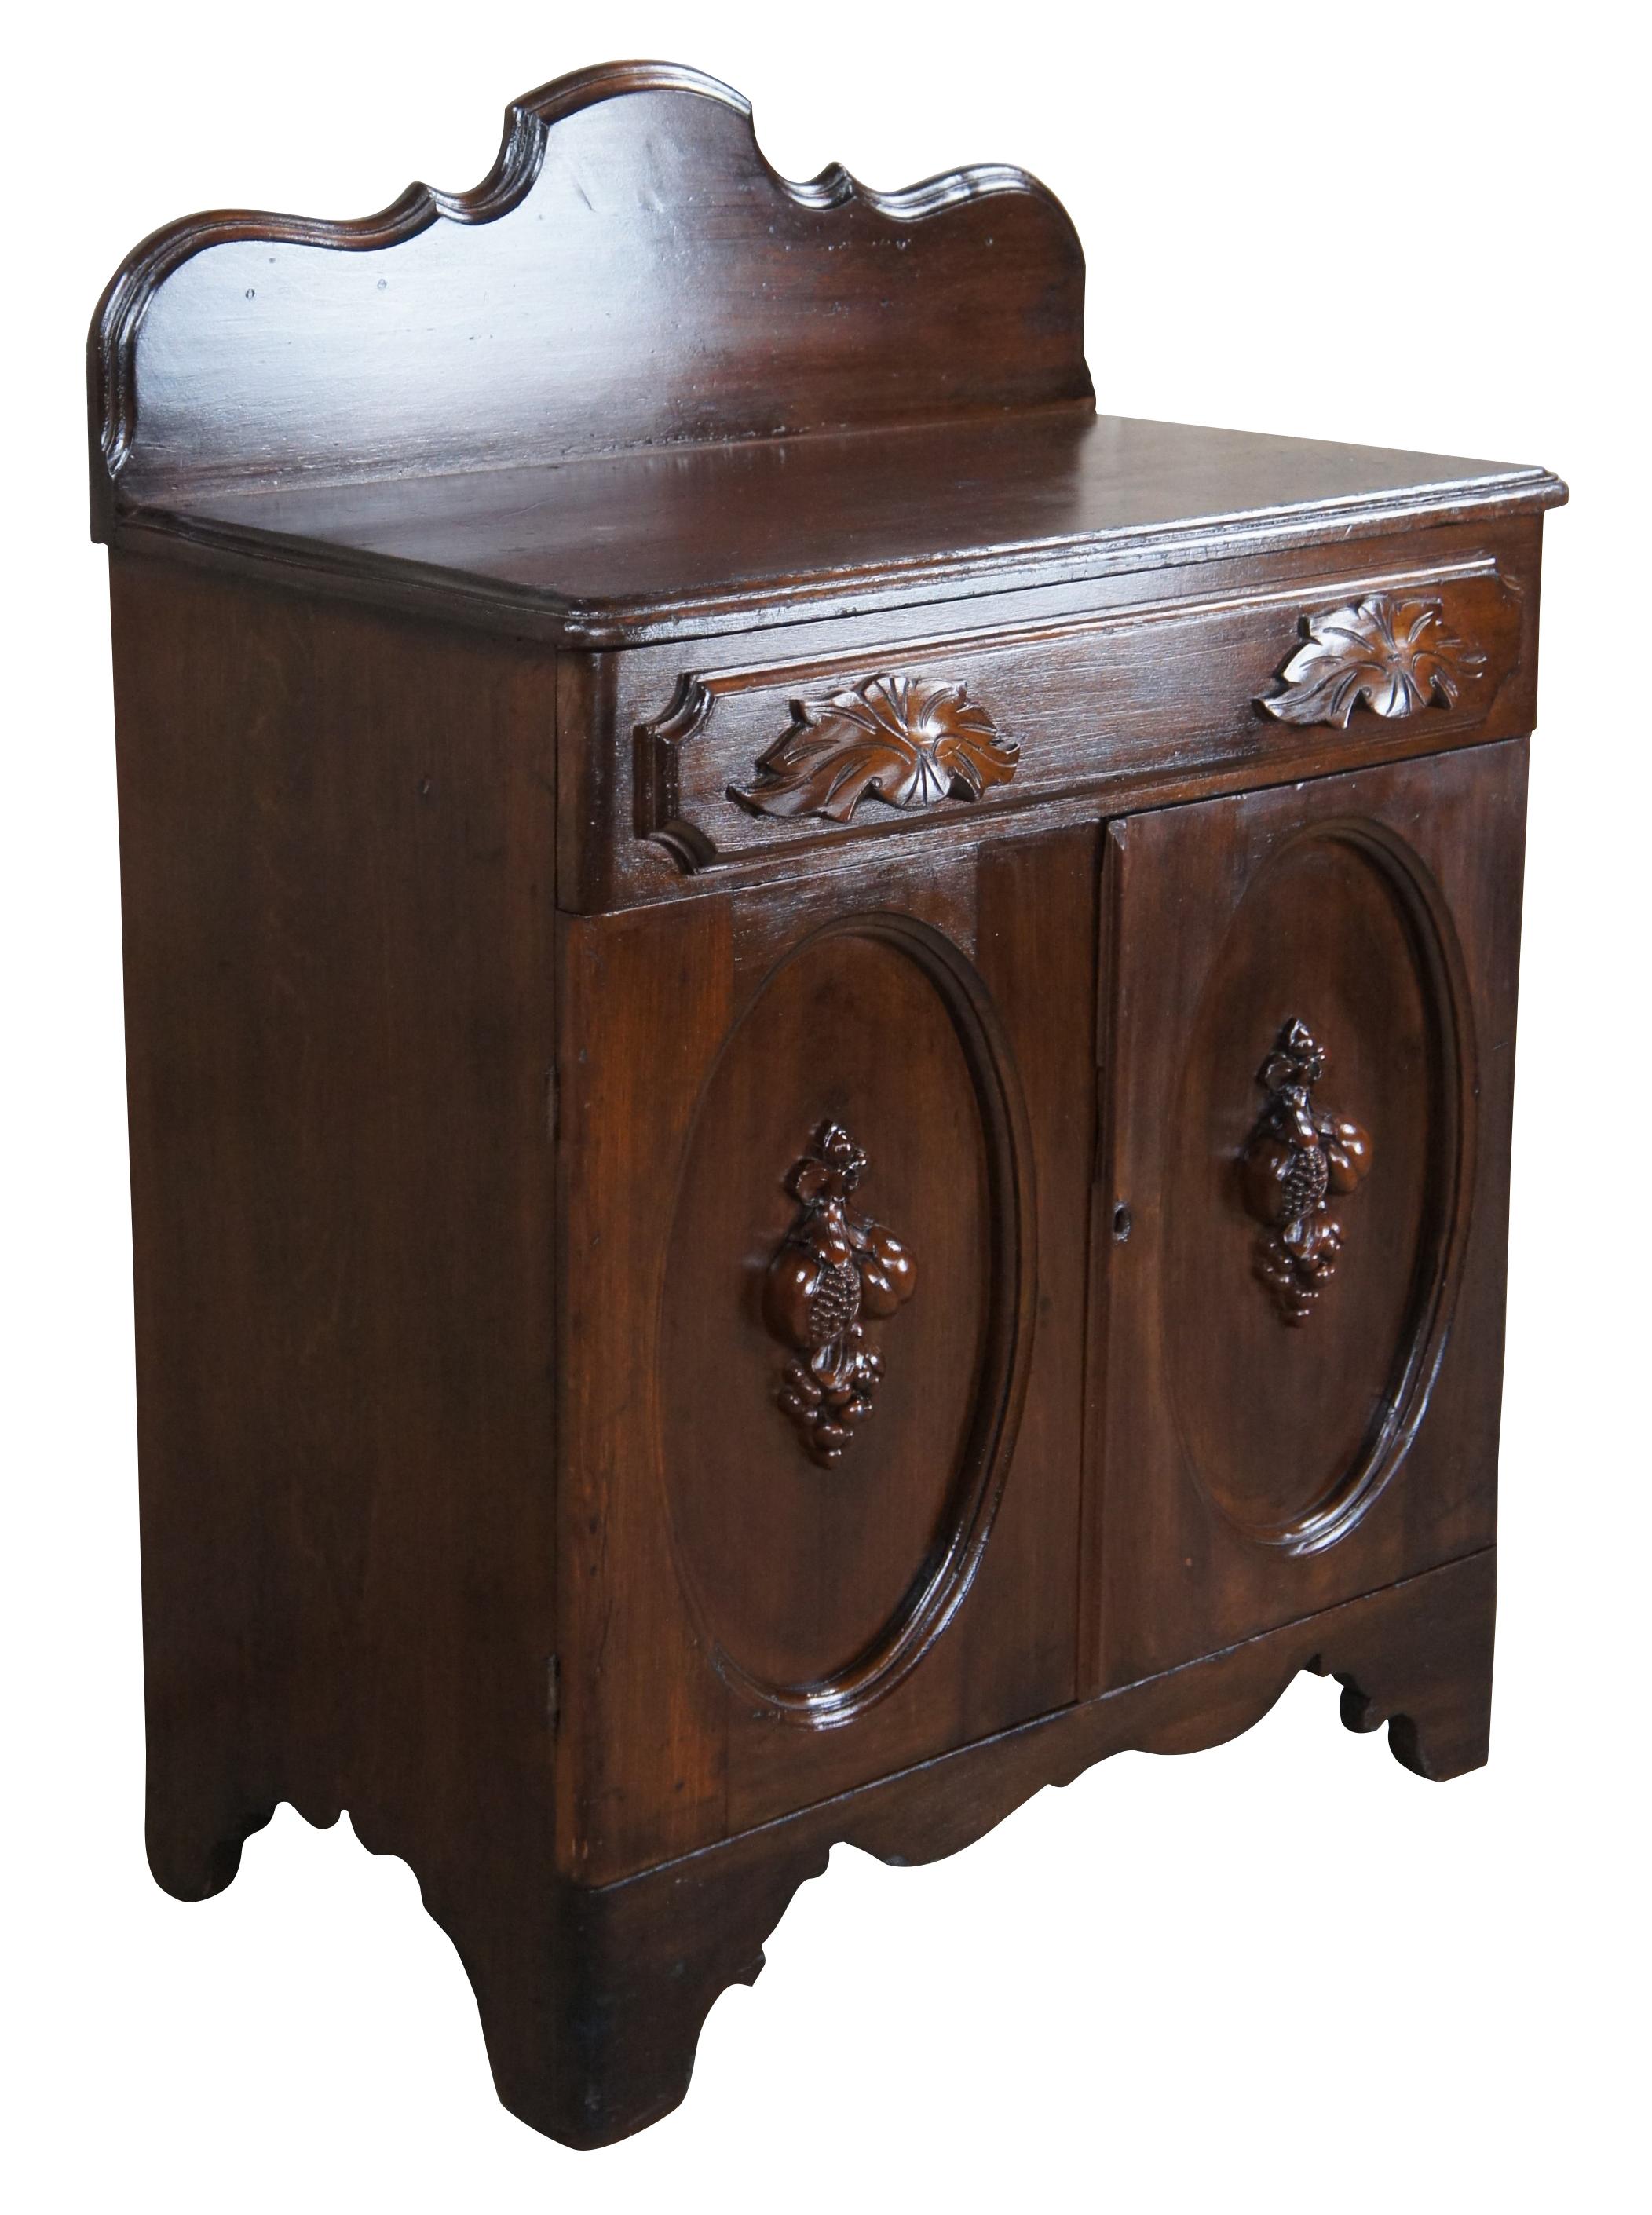 Antique Victorian parlor wash stand cabinet or side table / nightstand. Made of walnut featuring serpentine backsplash with upper drawer and lower cabinet and carved high relief fruit nut & berry design.

Measures: 26.5